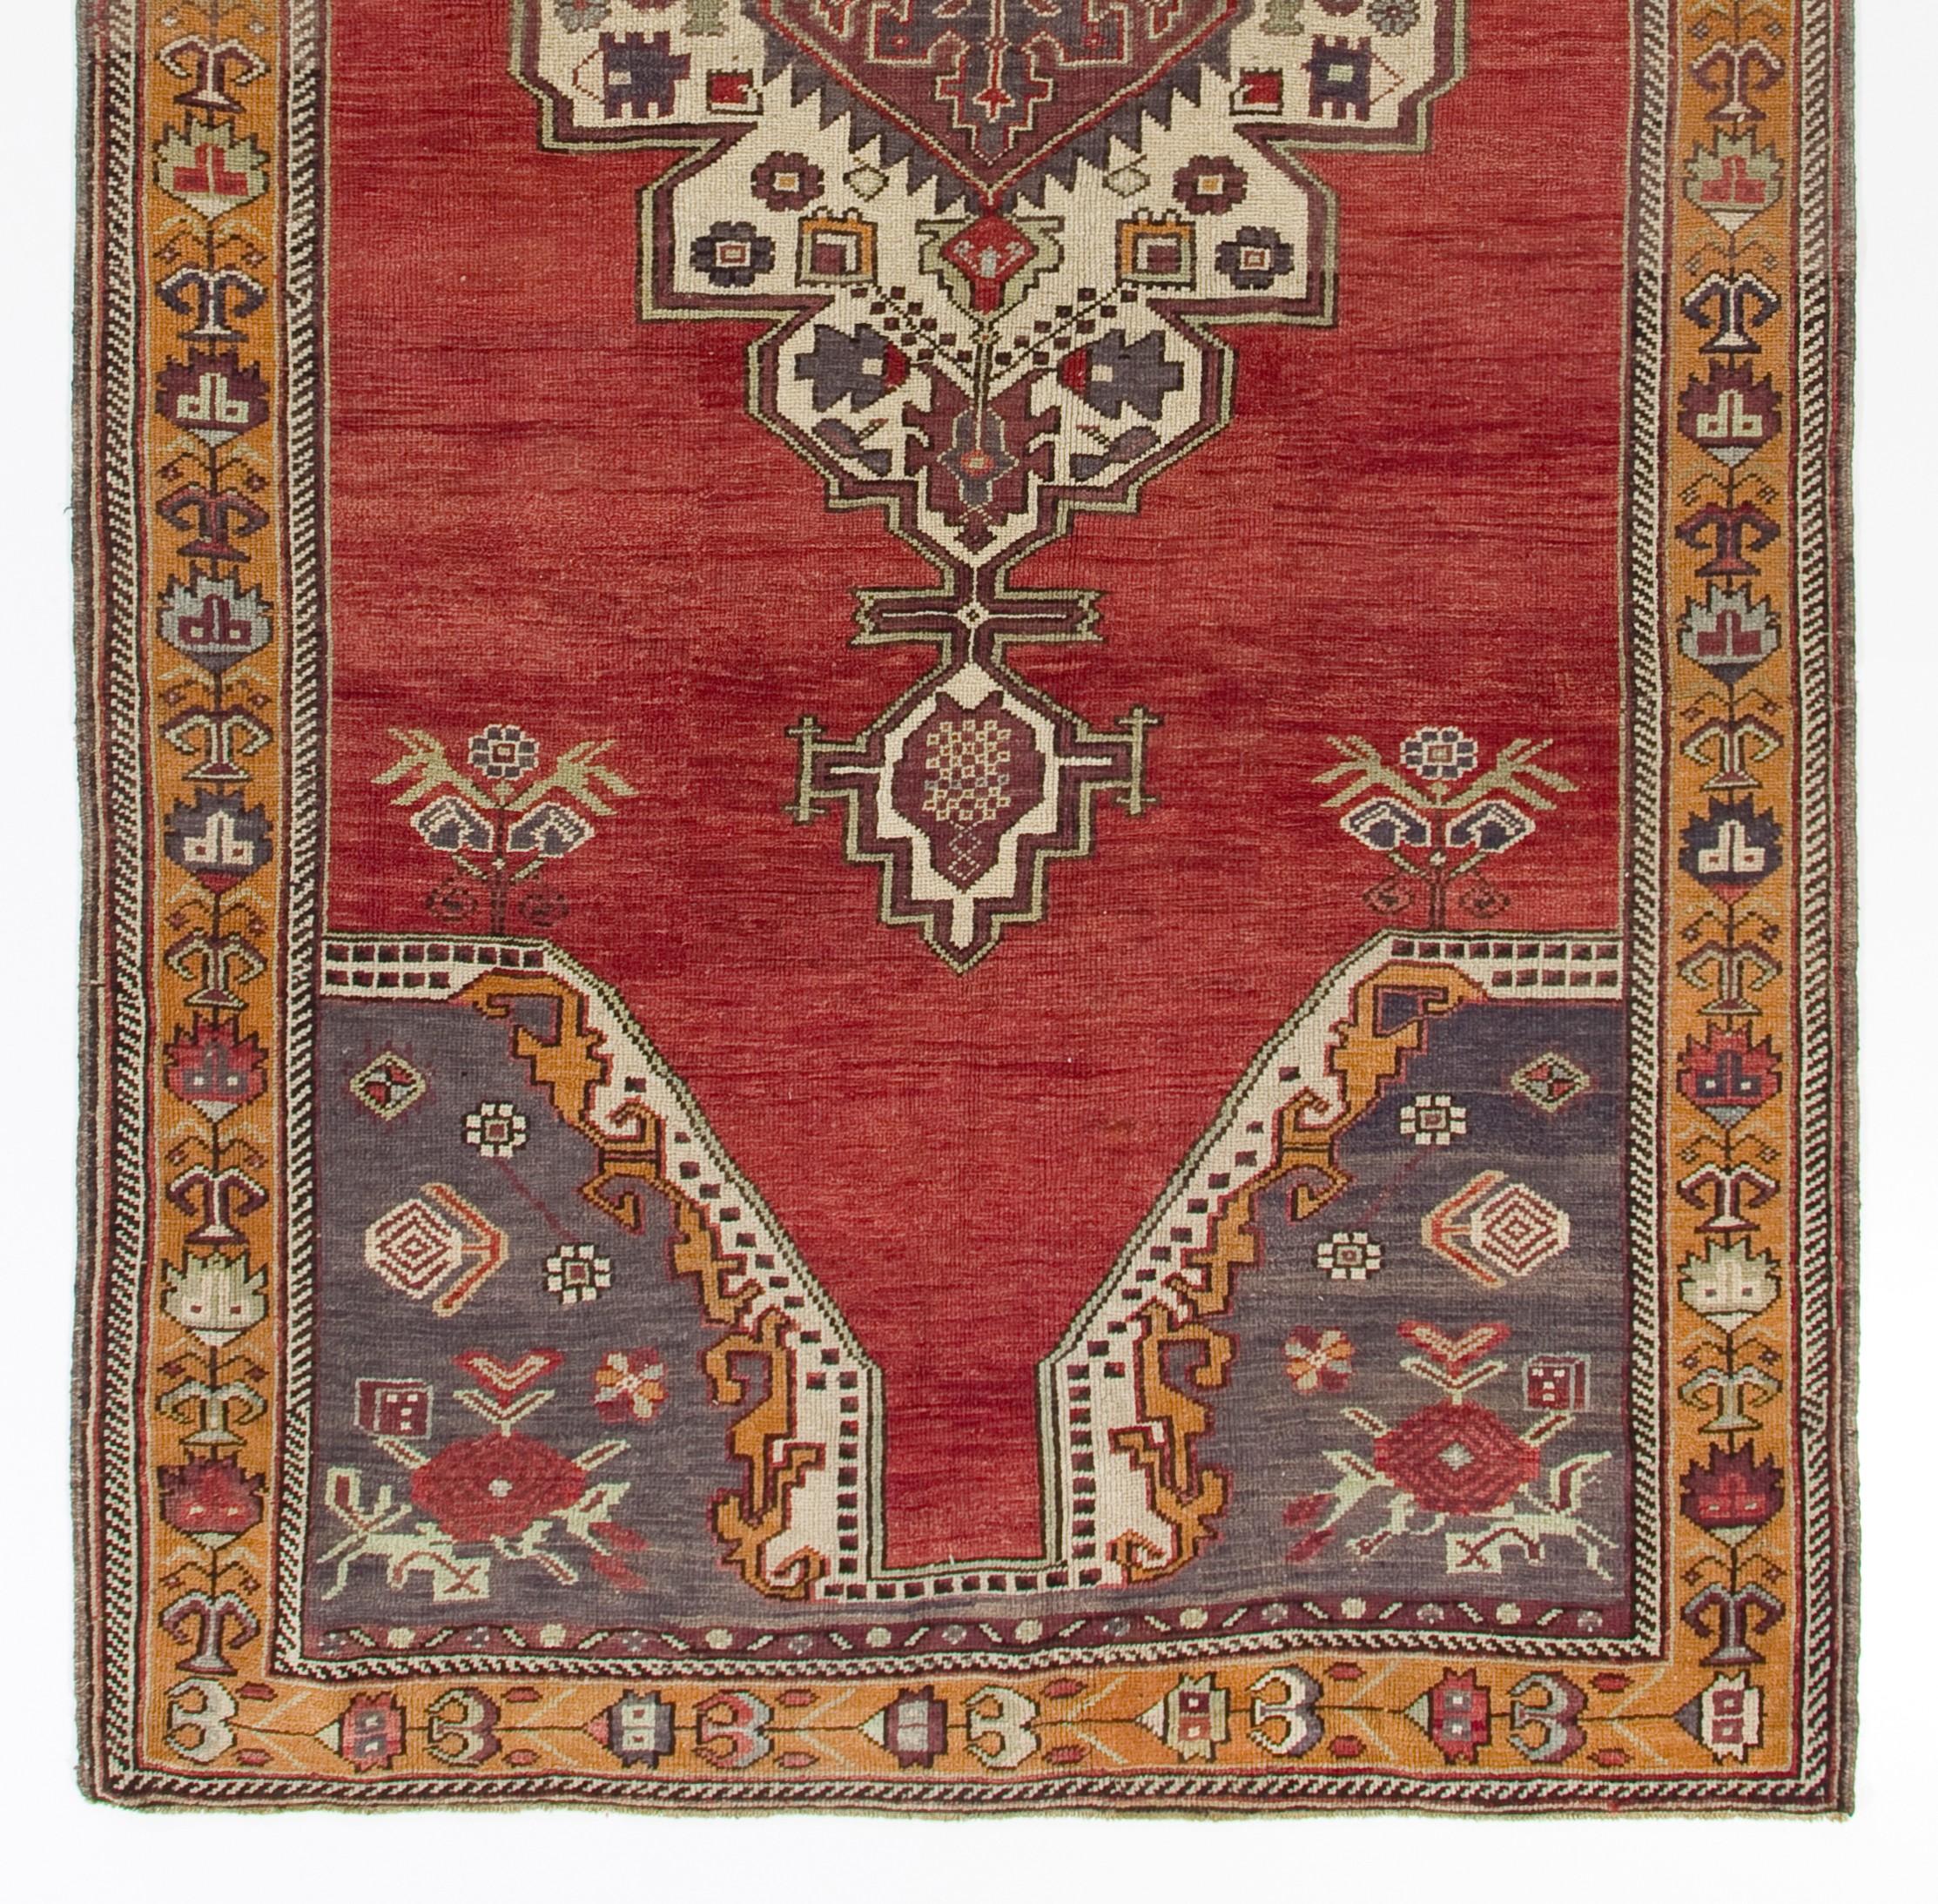 A lovely vintage hand-knotted Central Turkish rug with a design that features classical themes with a tribal aesthetic, that is more rectilinear and geometric with saturated, deep colors of red, indigo and marigold as well as cream. Measures: 5.9 x